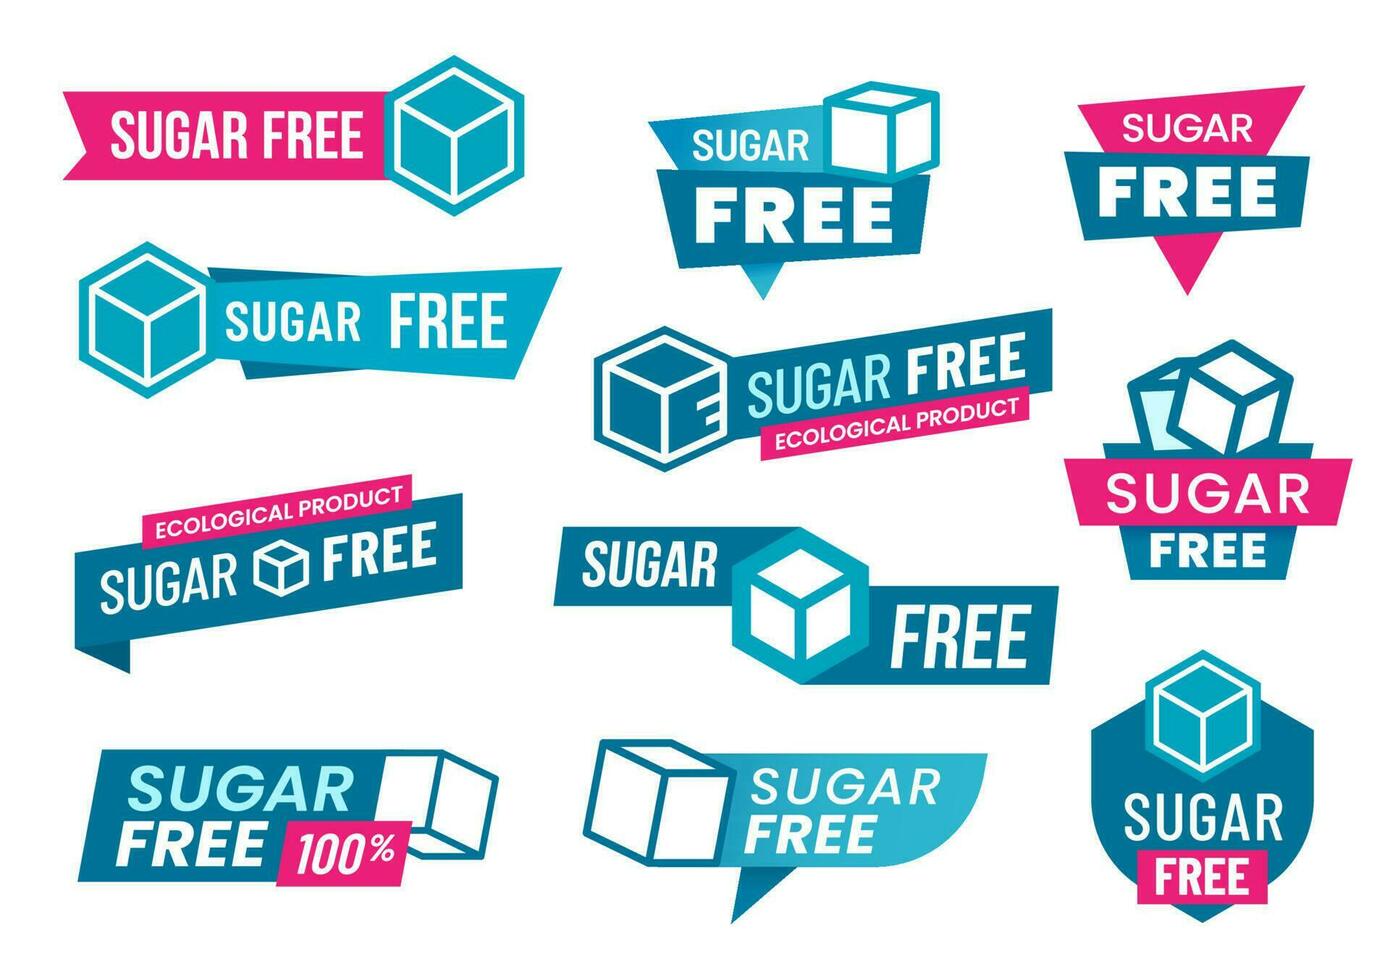 Sugar free labels and icons of diet food products vector